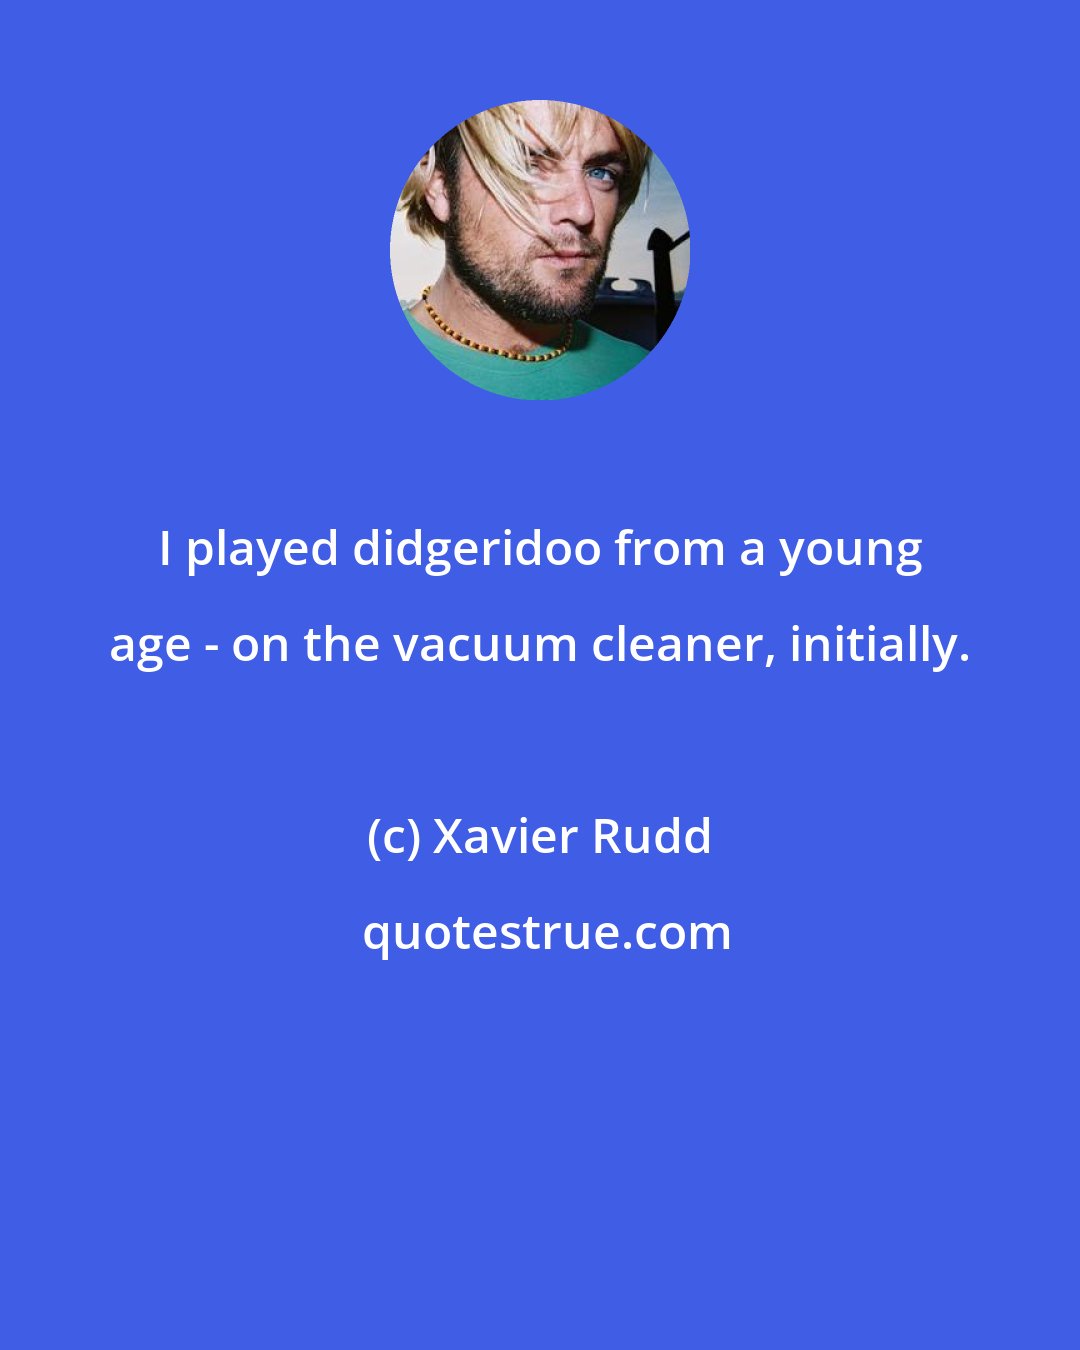 Xavier Rudd: I played didgeridoo from a young age - on the vacuum cleaner, initially.